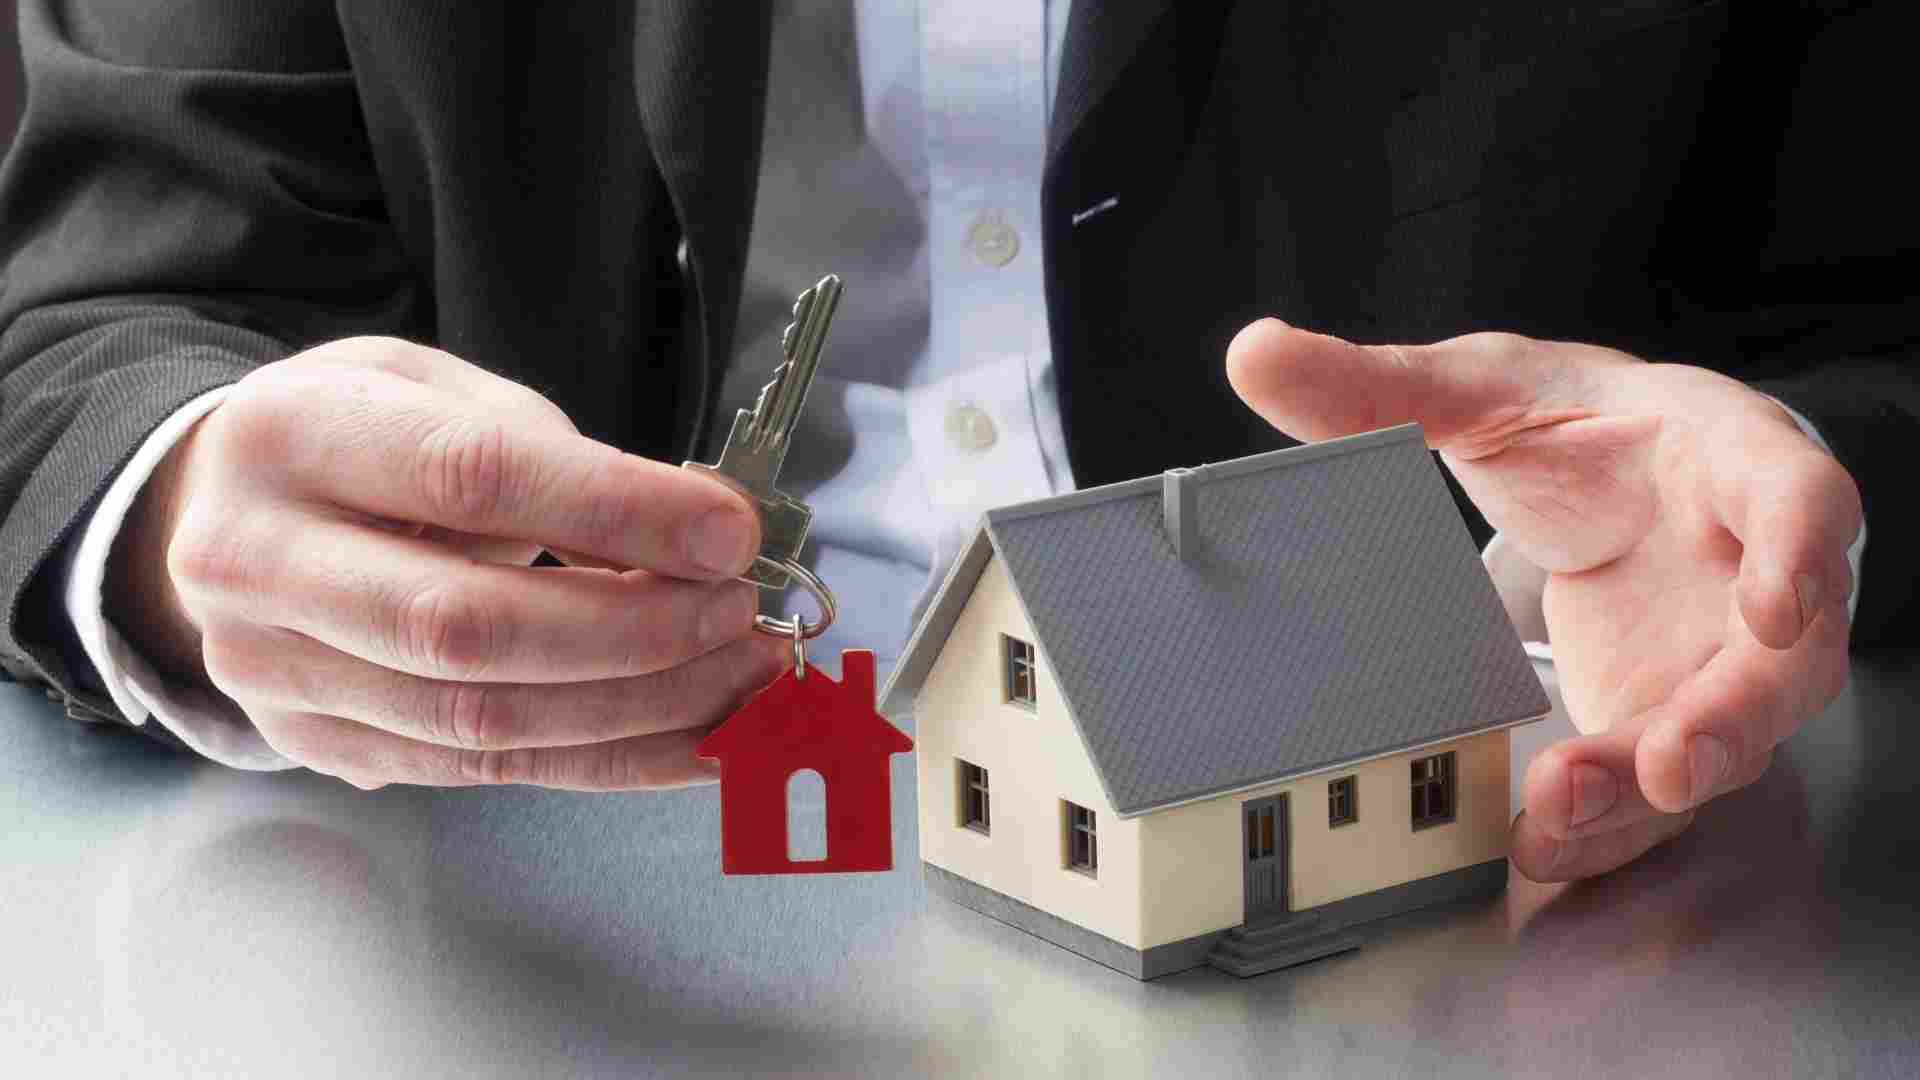 person holding a keychain with a red house on it next to a house figurine